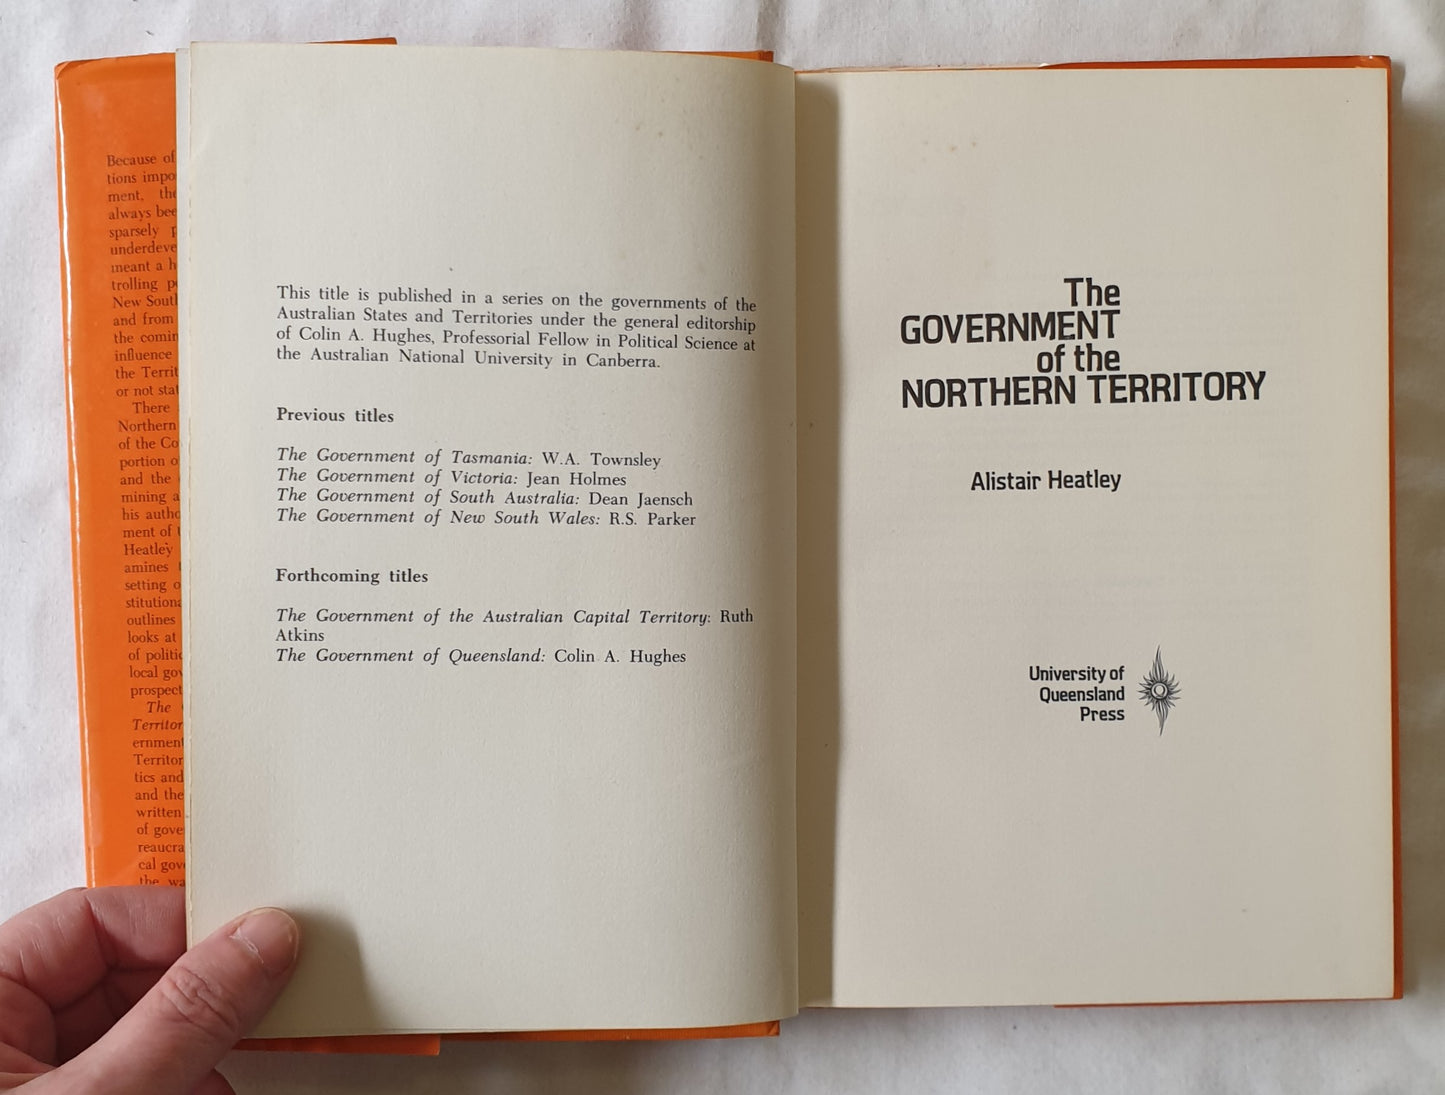 The Government of the Northern Territory by Alistair Heatley